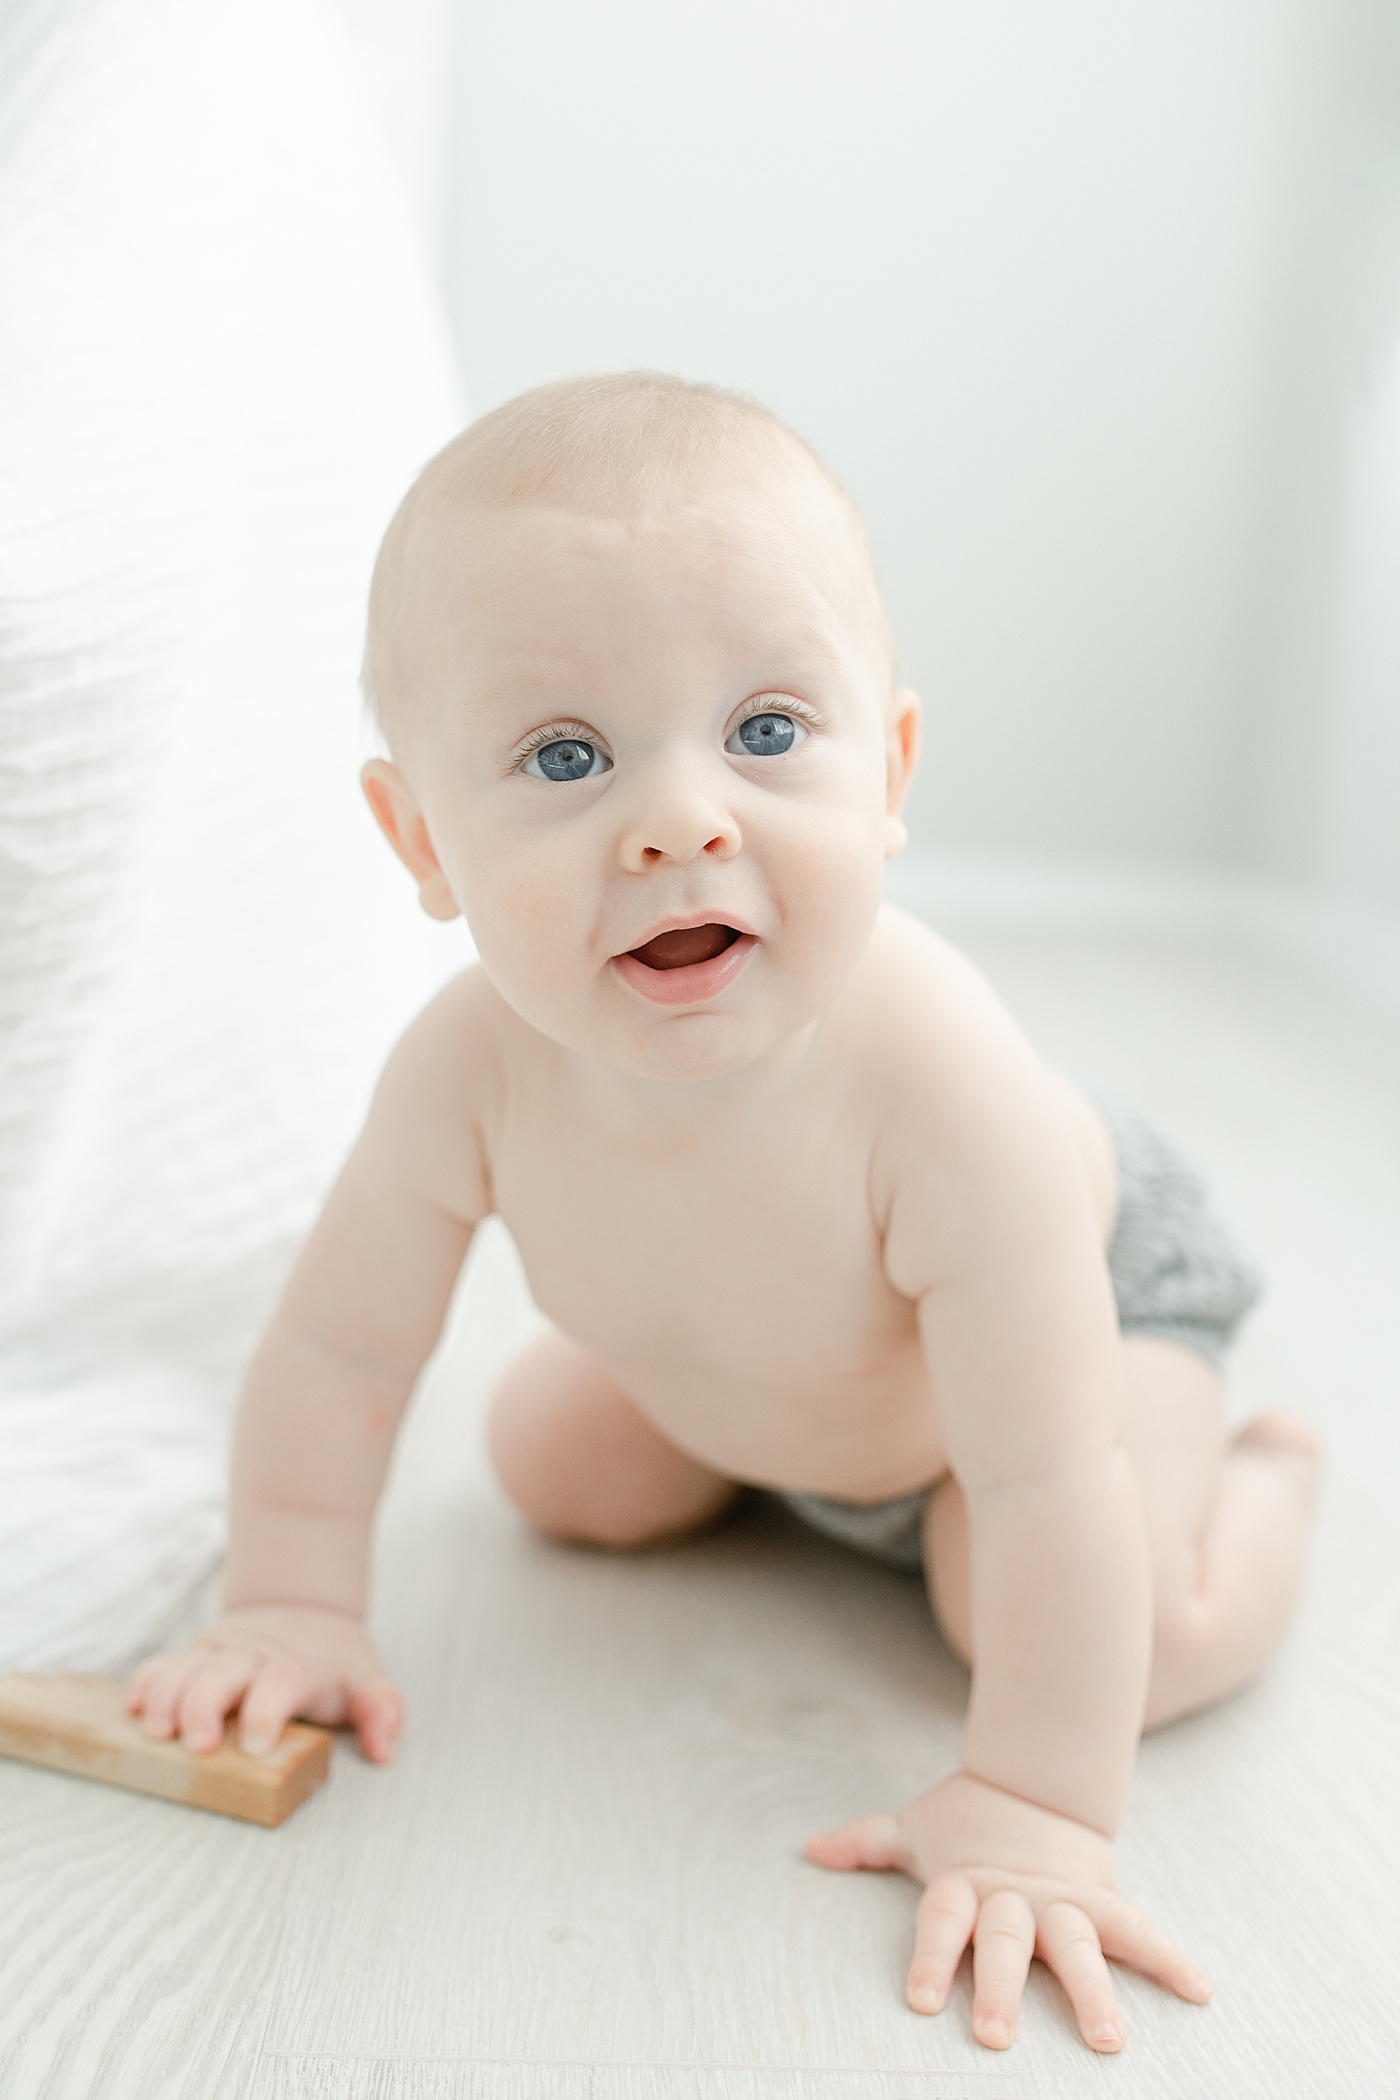 Baby boy in gray crawling on the floor | Photo by Little Sunshine Photography